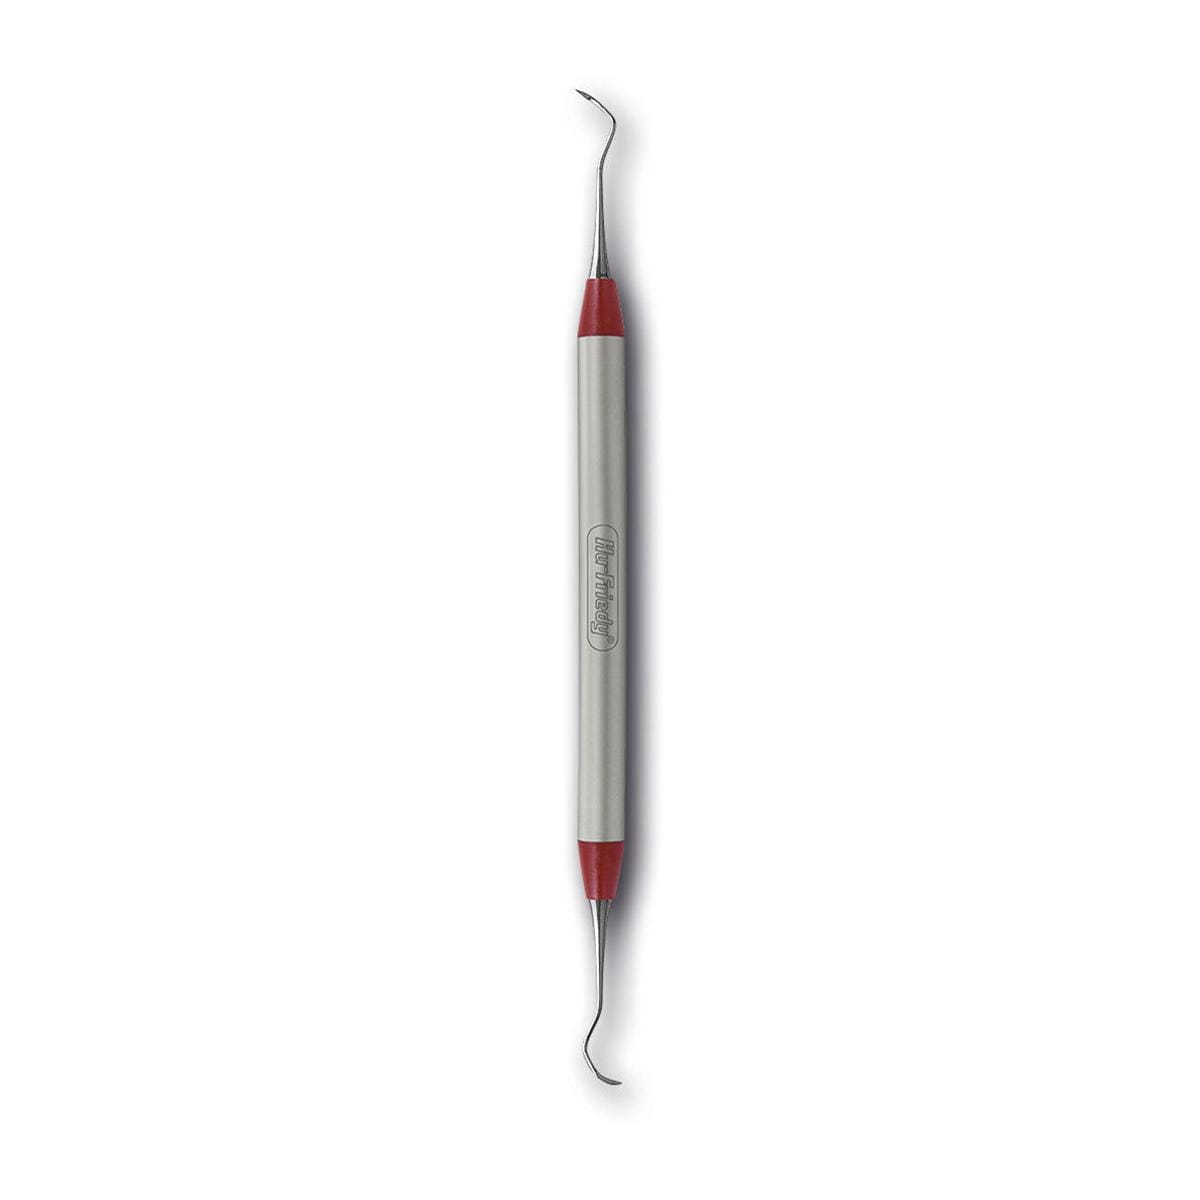 Scaler - EverEdge 2.0, Color Cones smooth handle - Posterior 204S, S204SCCHE2